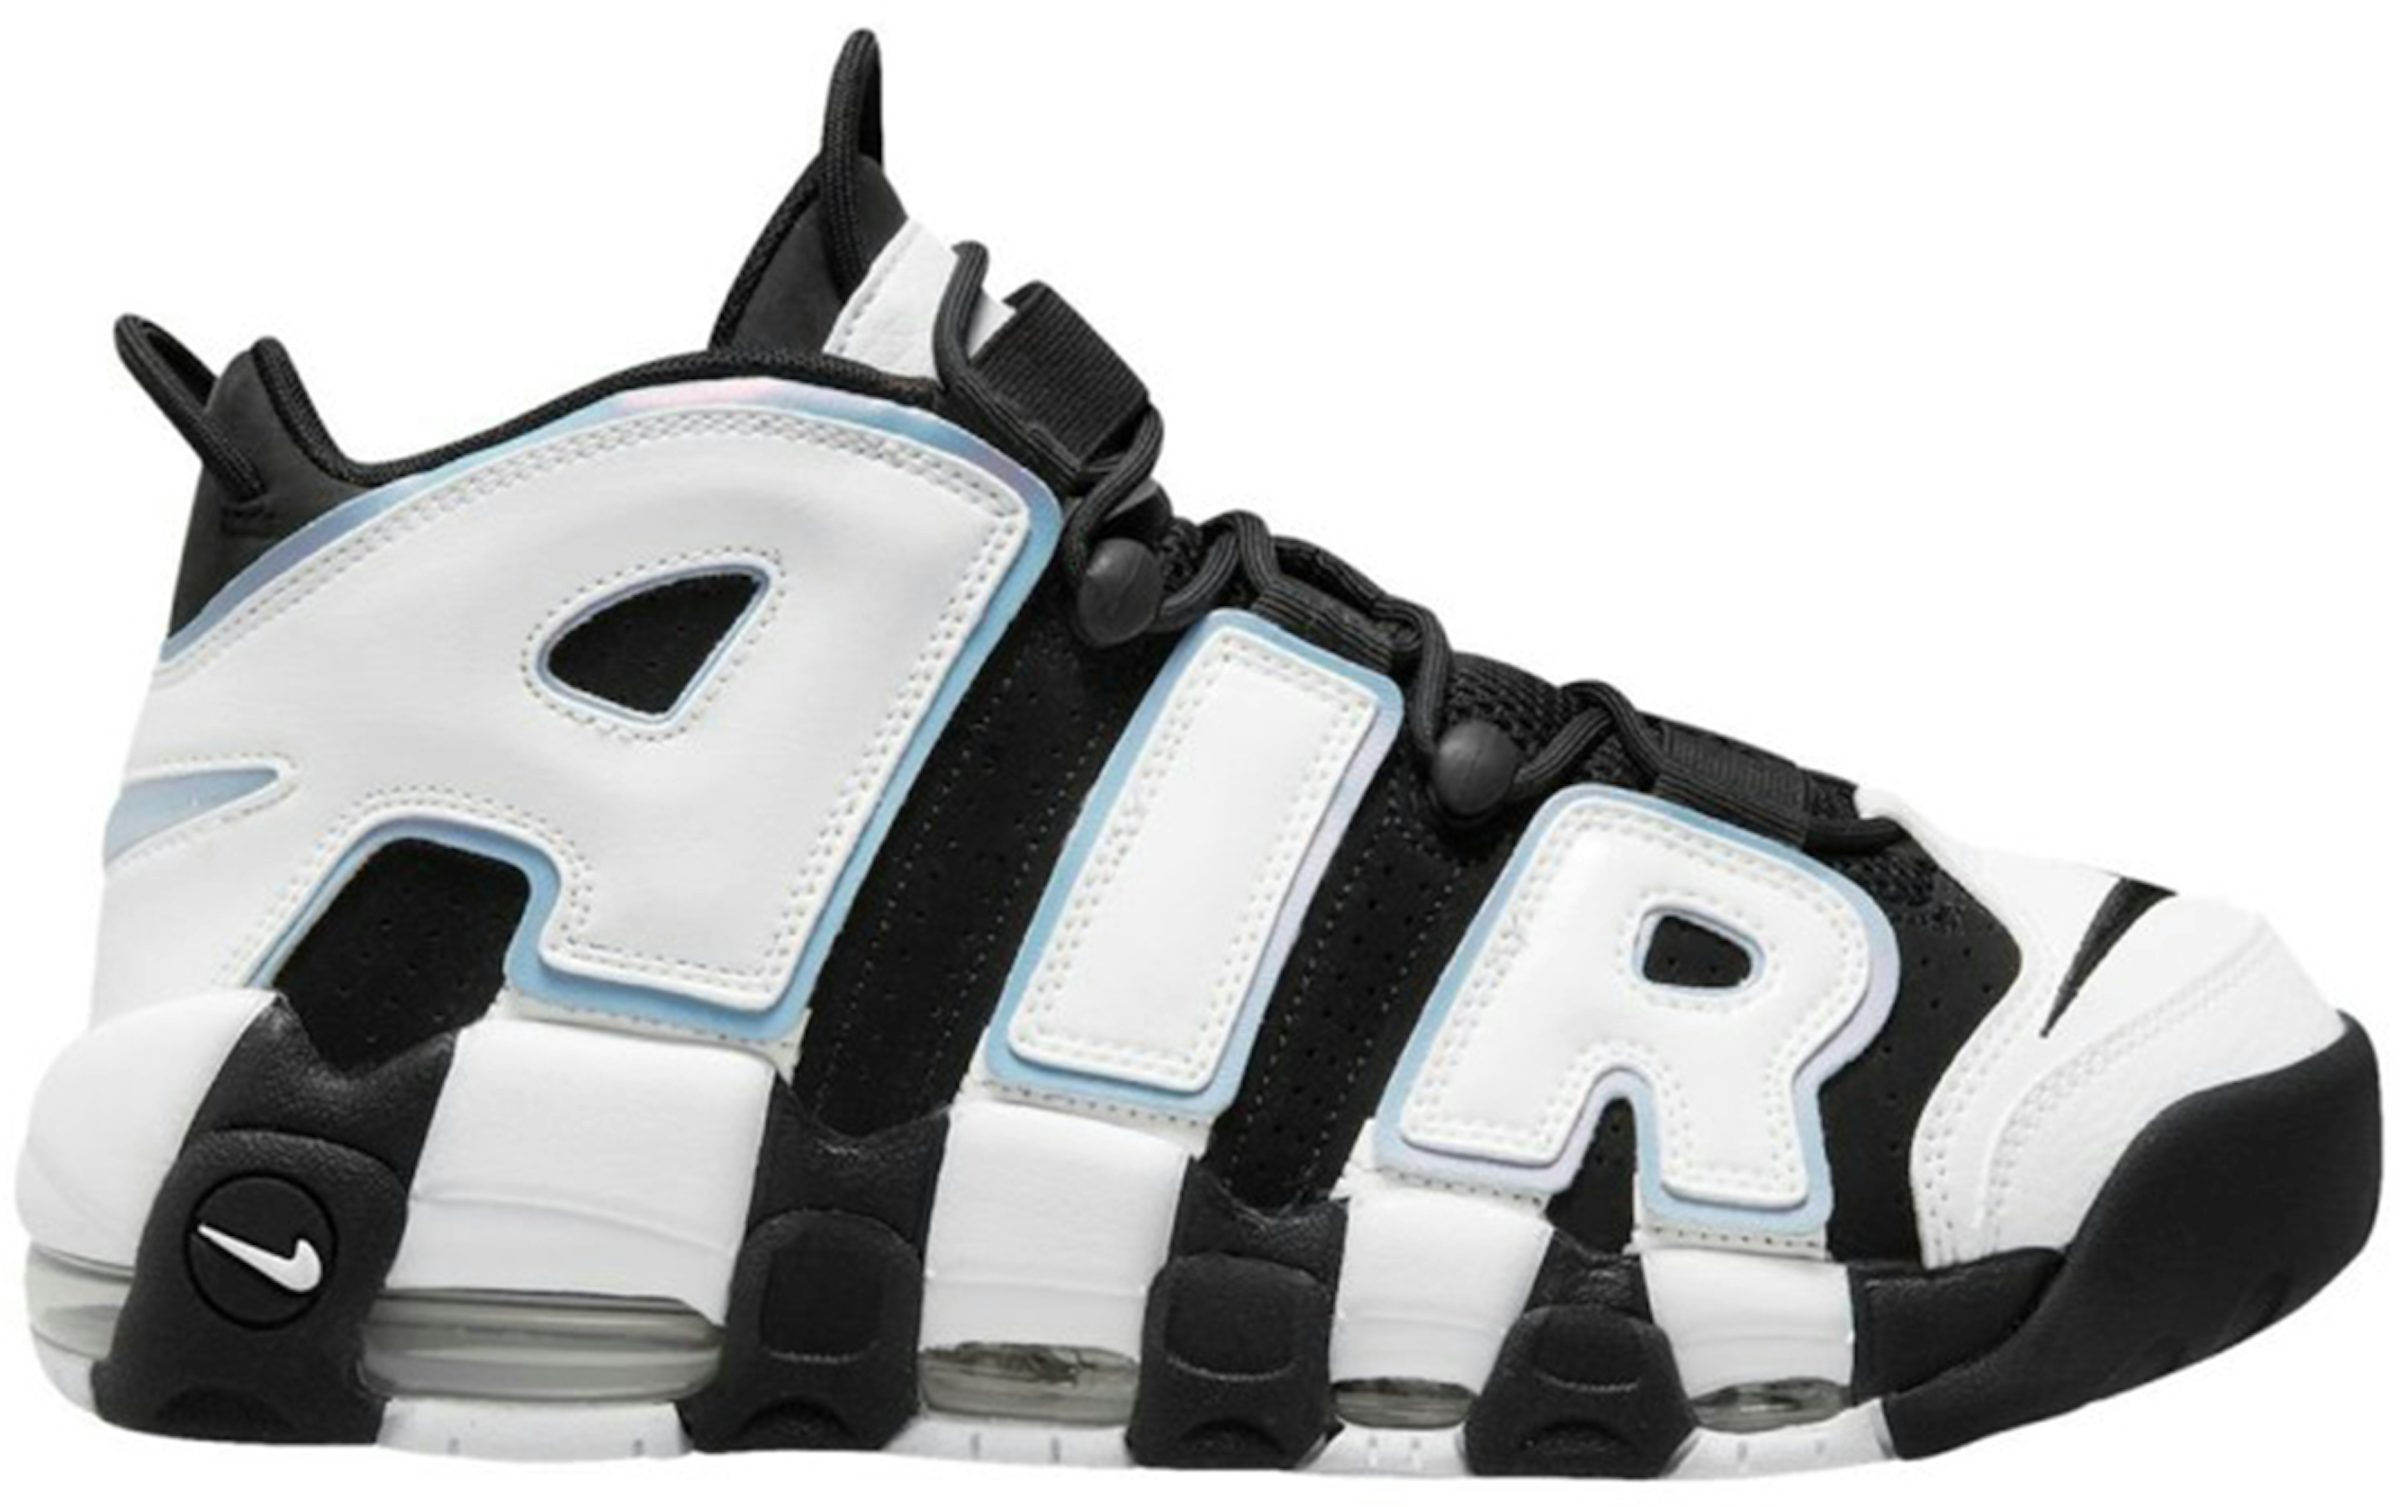 Hand painted Avengers Nike uptempos